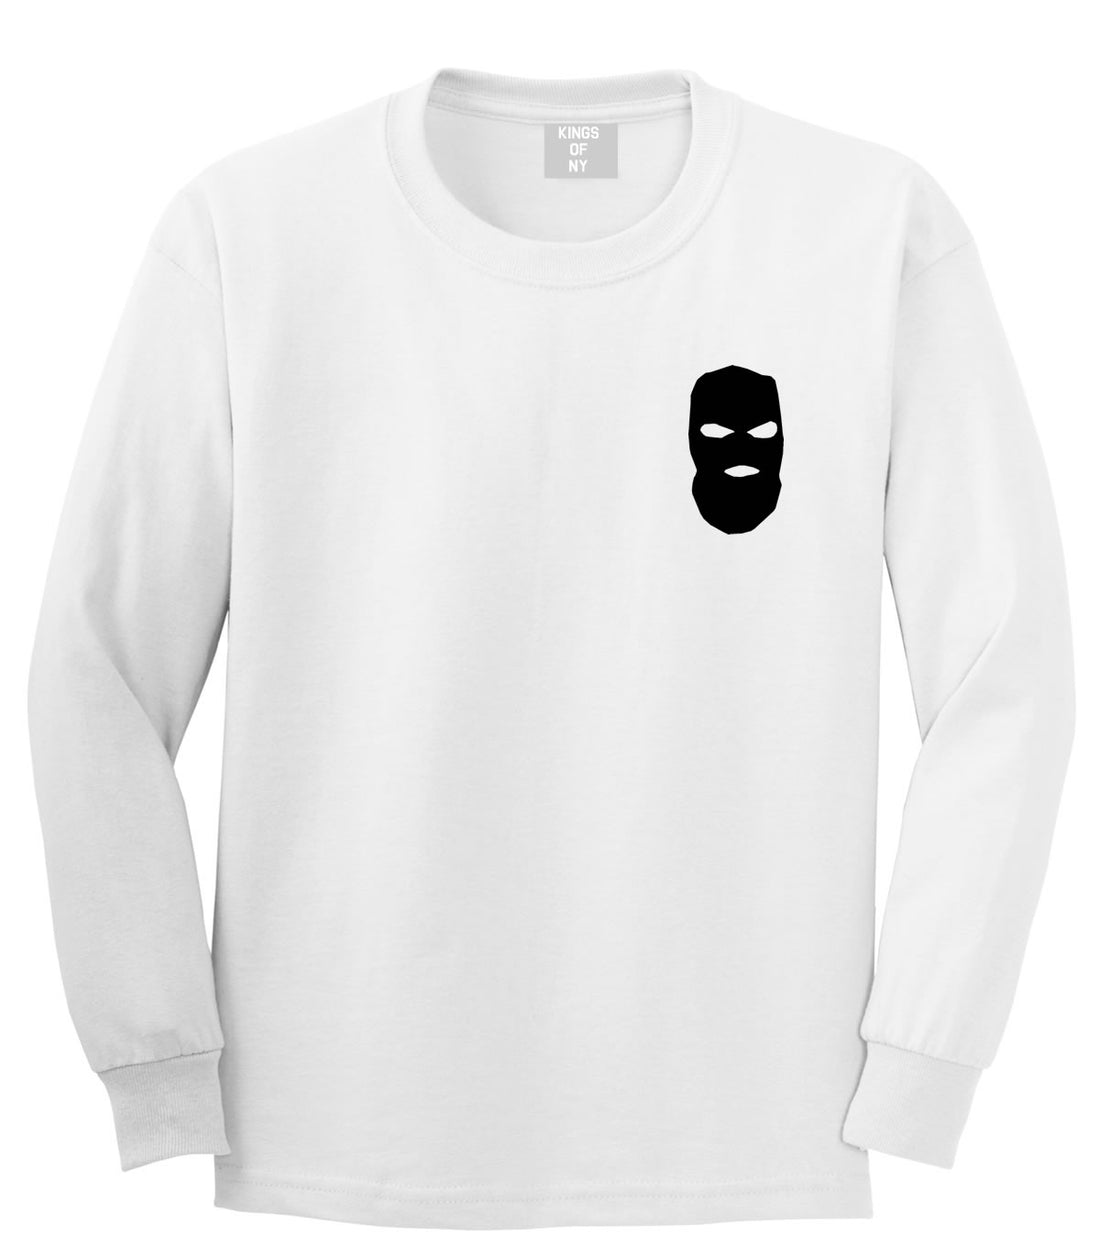 Ski Mask Way Robber Chest Logo Long Sleeve T-Shirt in White By Kings Of NY